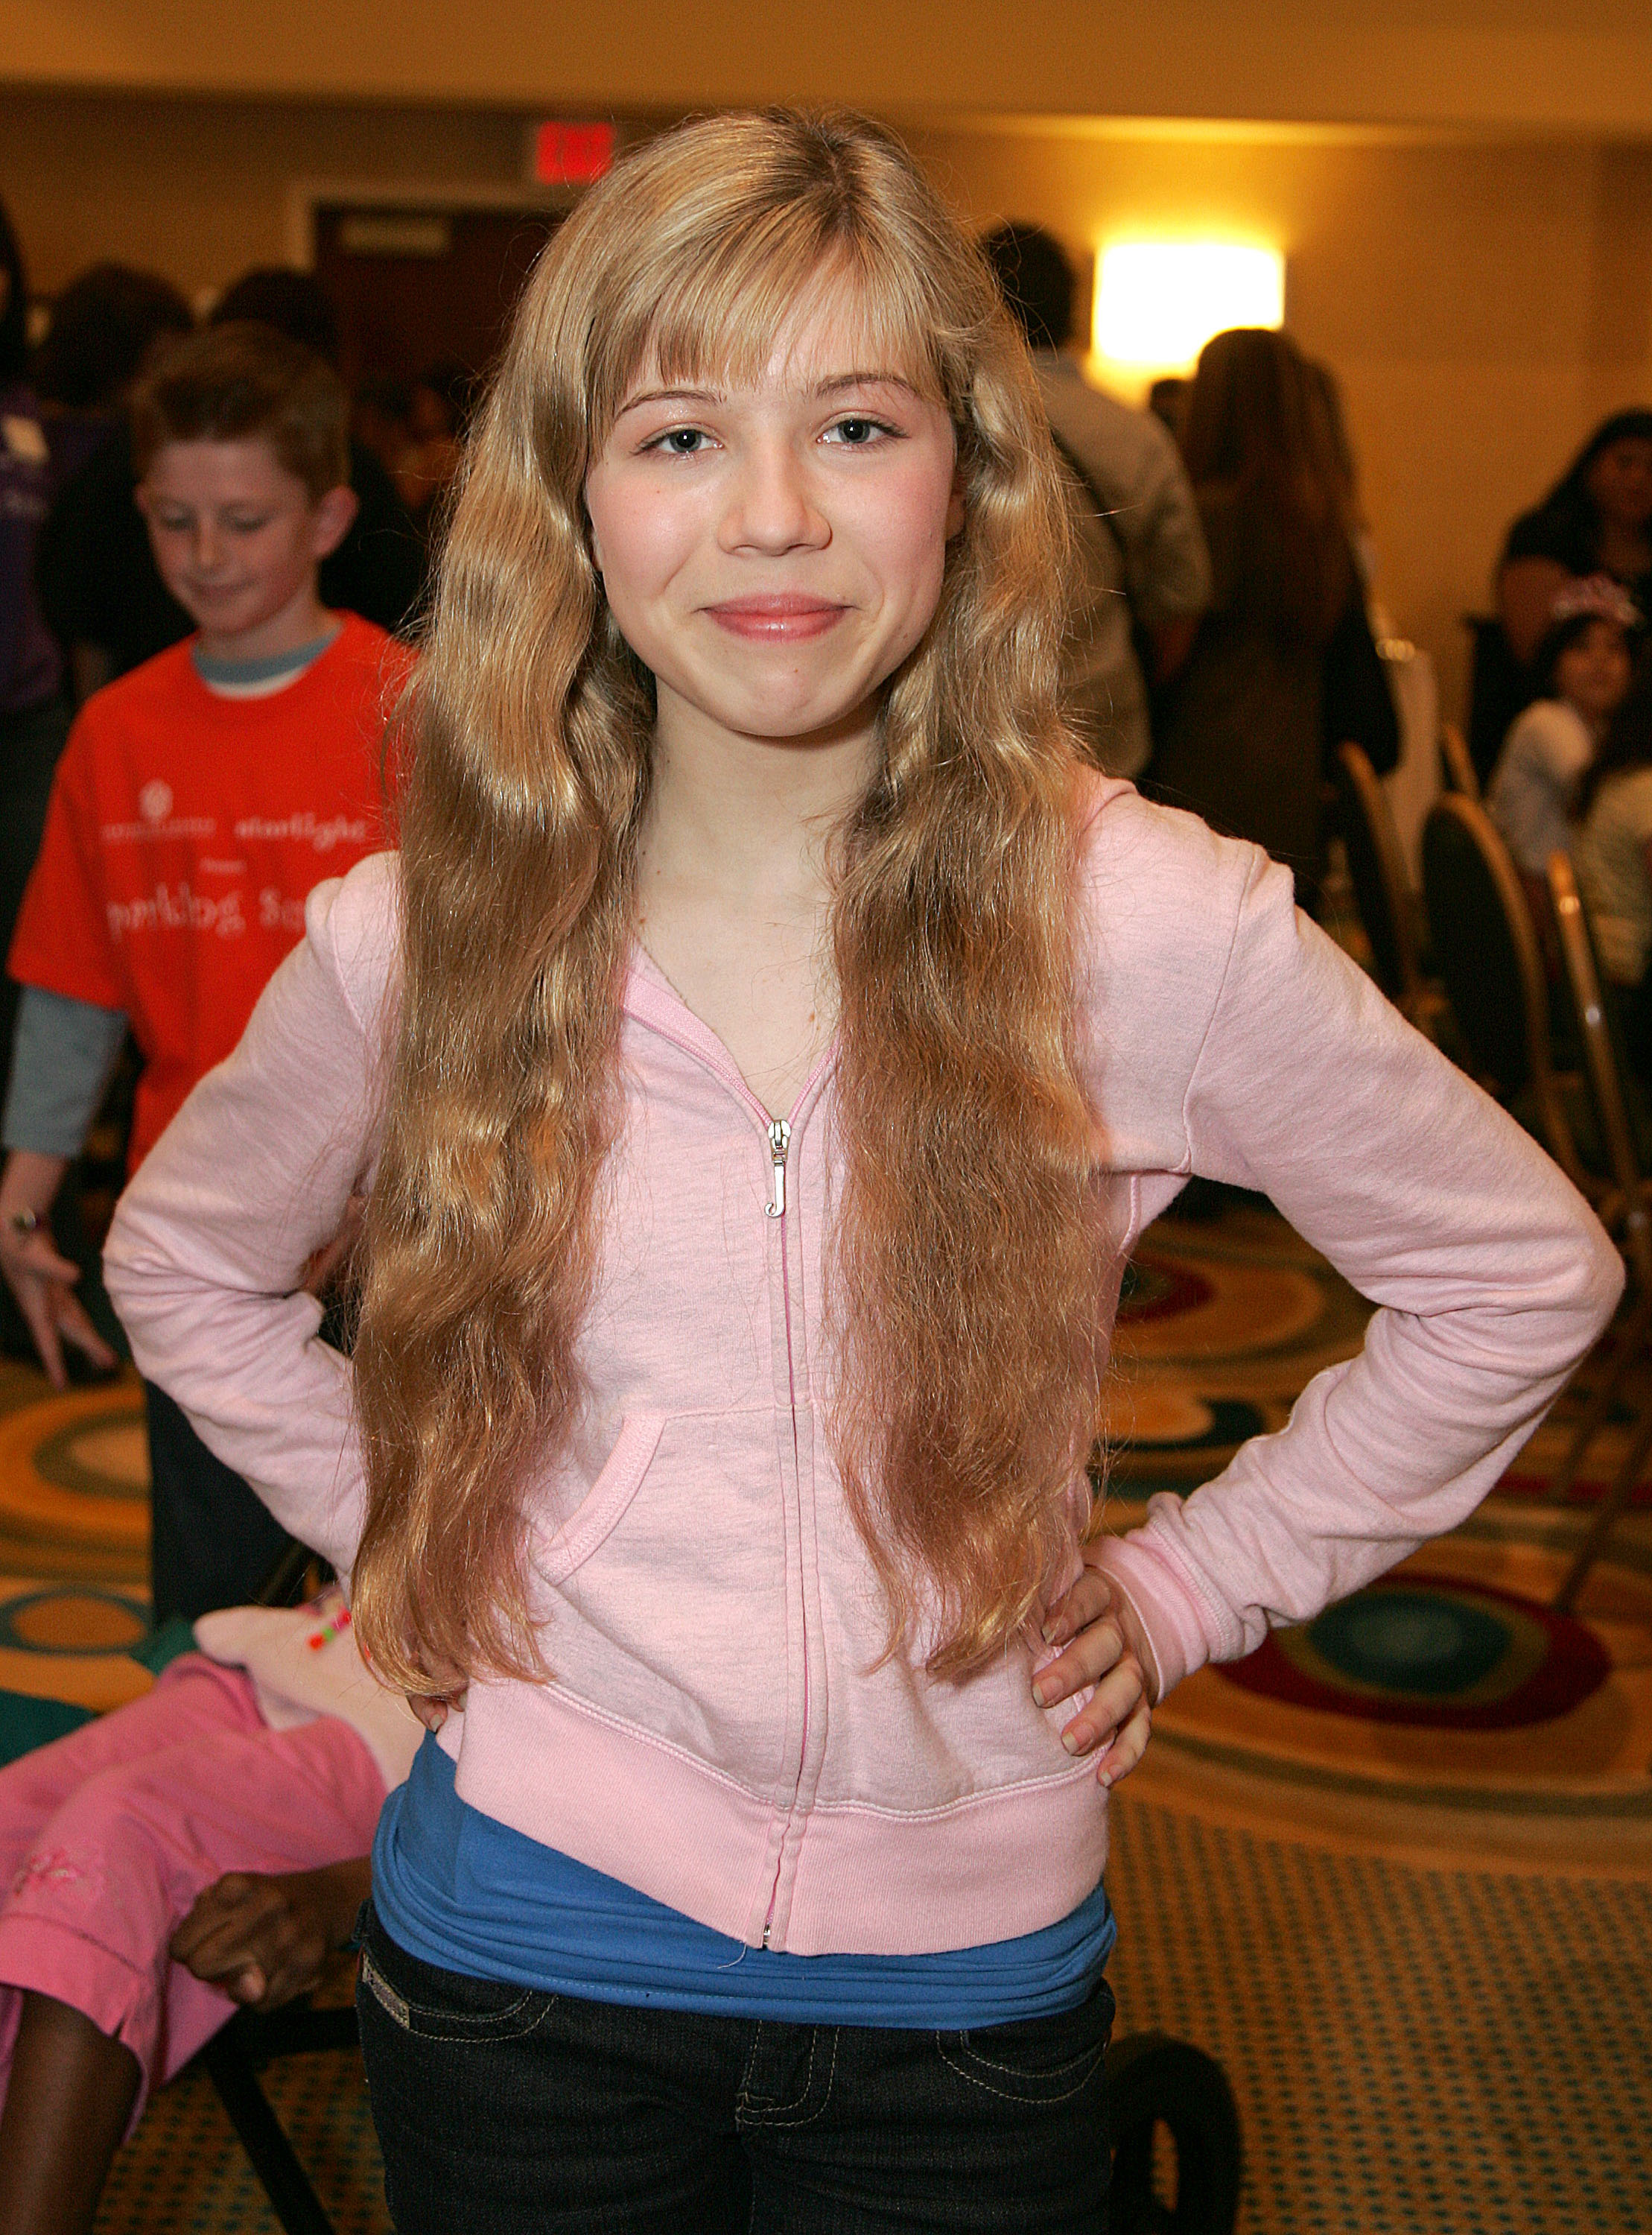 Jennette McCurdy on March 9, 2008 in Los Angeles, California | Source: Getty Images